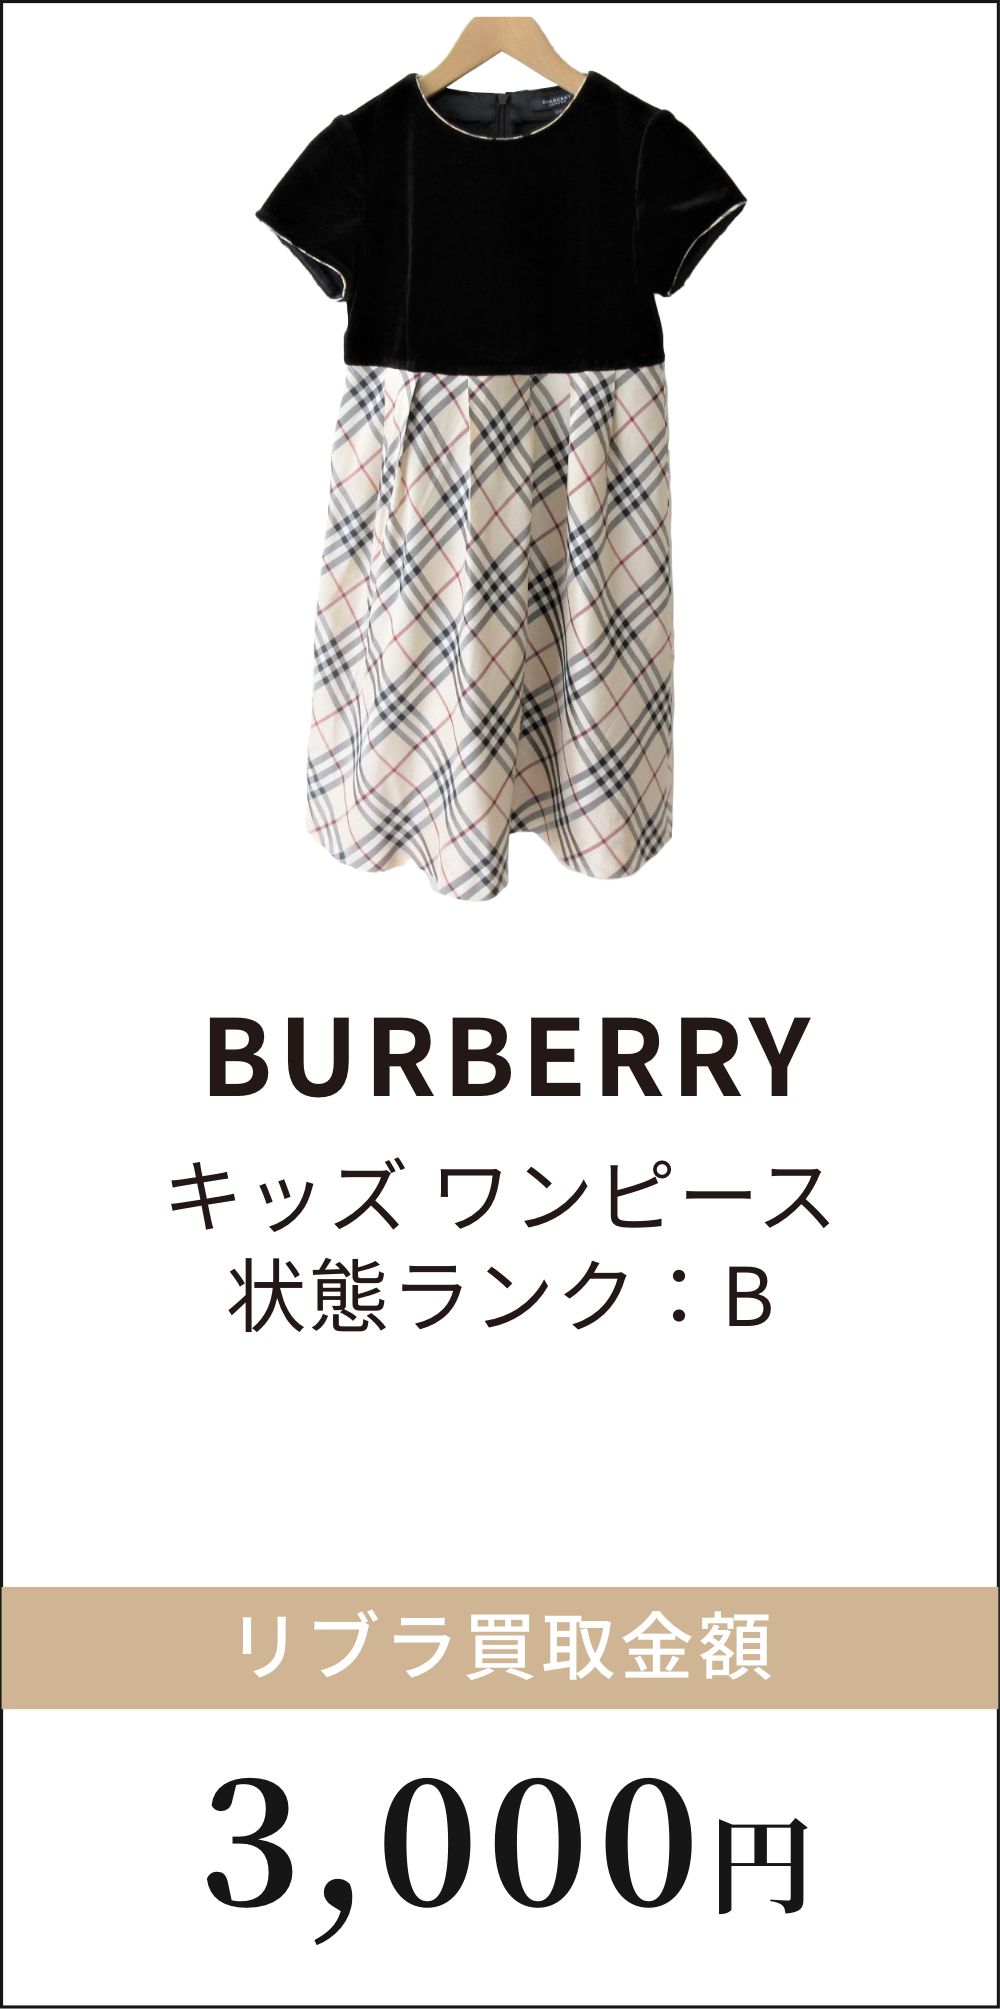 BURBERRY キッズワンピース